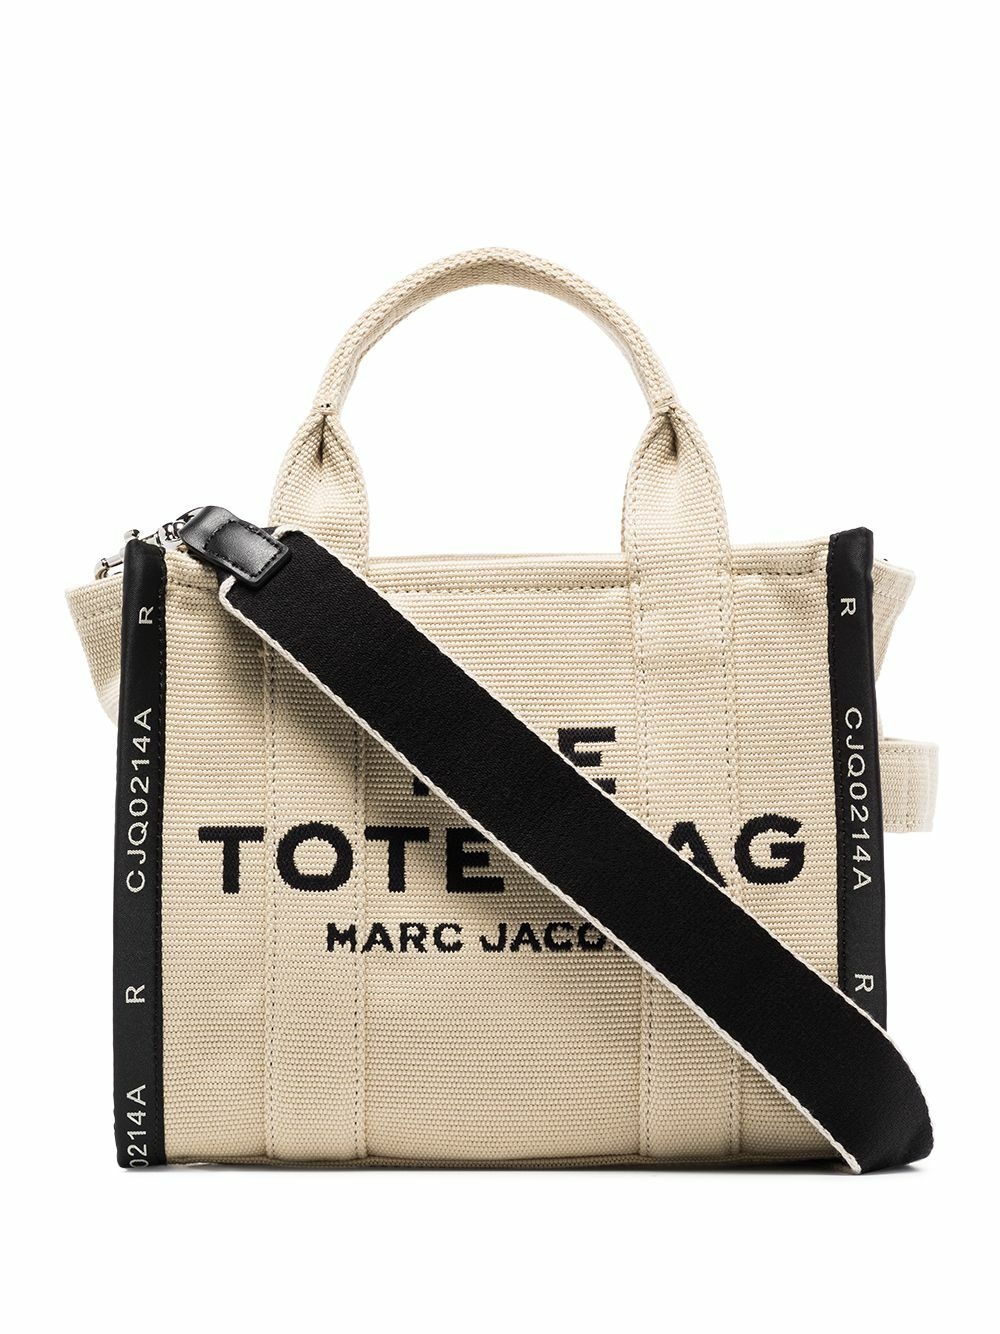 MARC JACOBS - The Tote Small Canvas Tote Bag Marc Jacobs